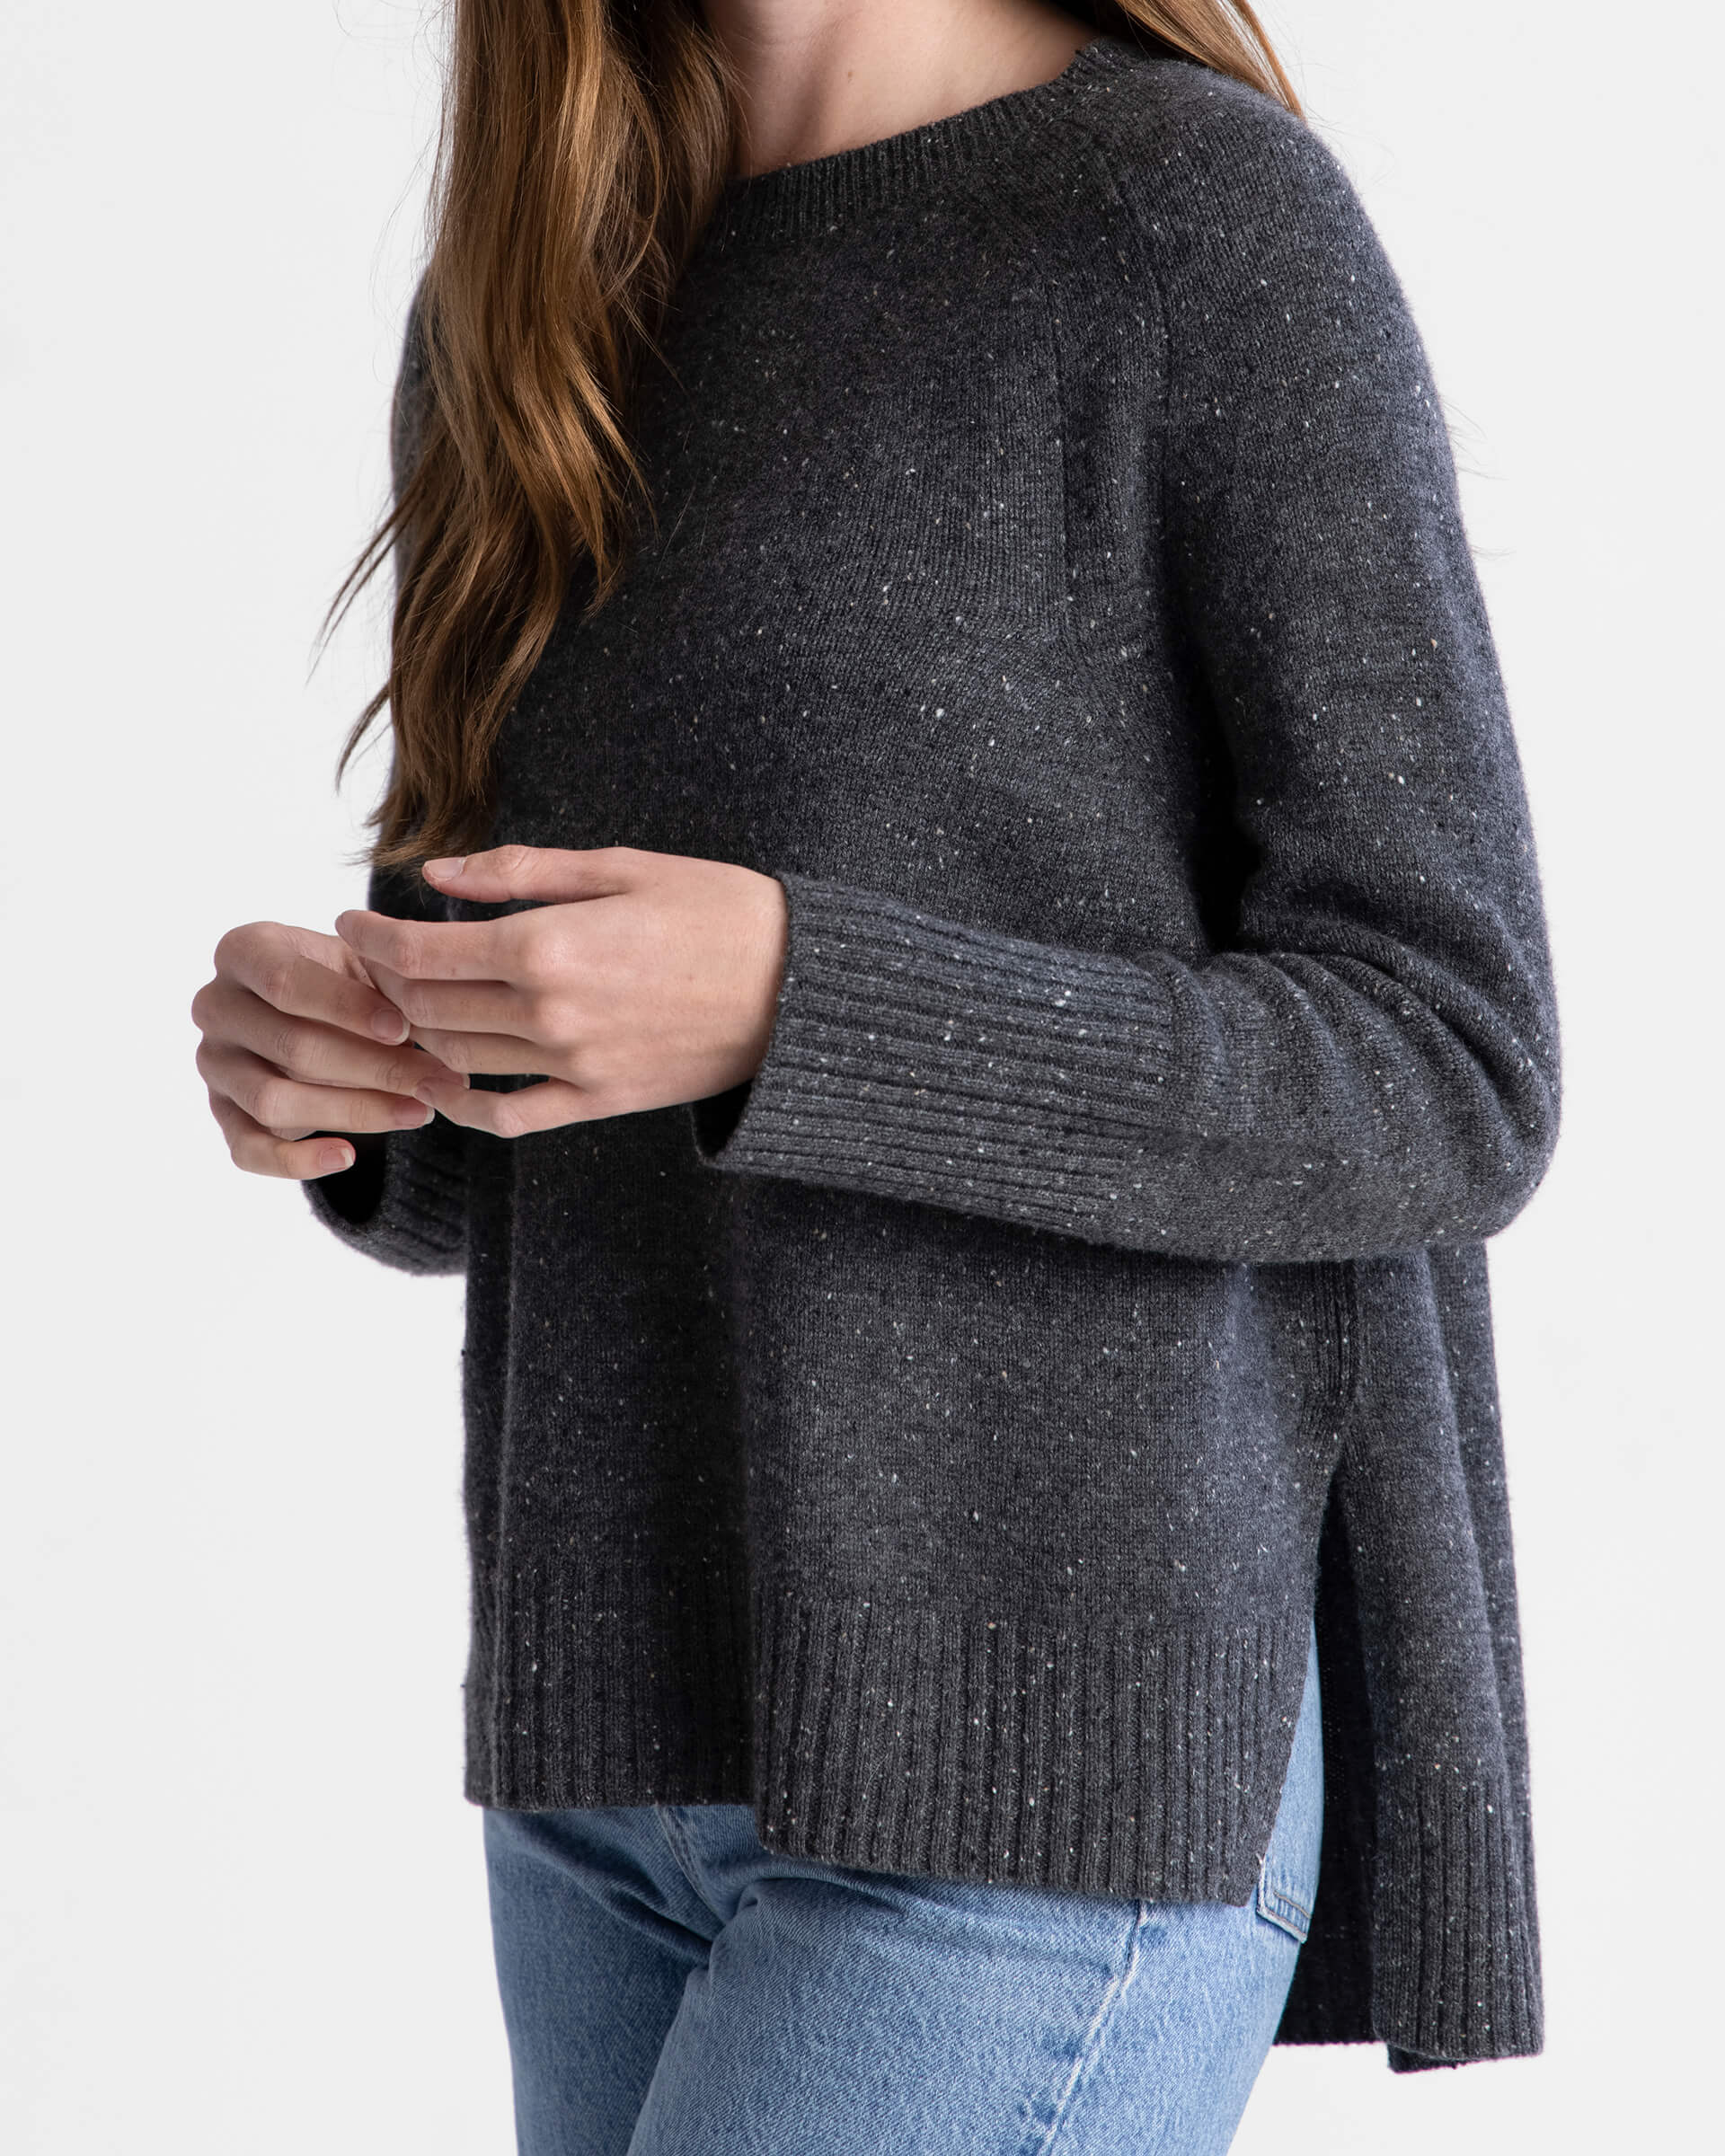 Banff Cashmere Crew Sweater in Charcoal